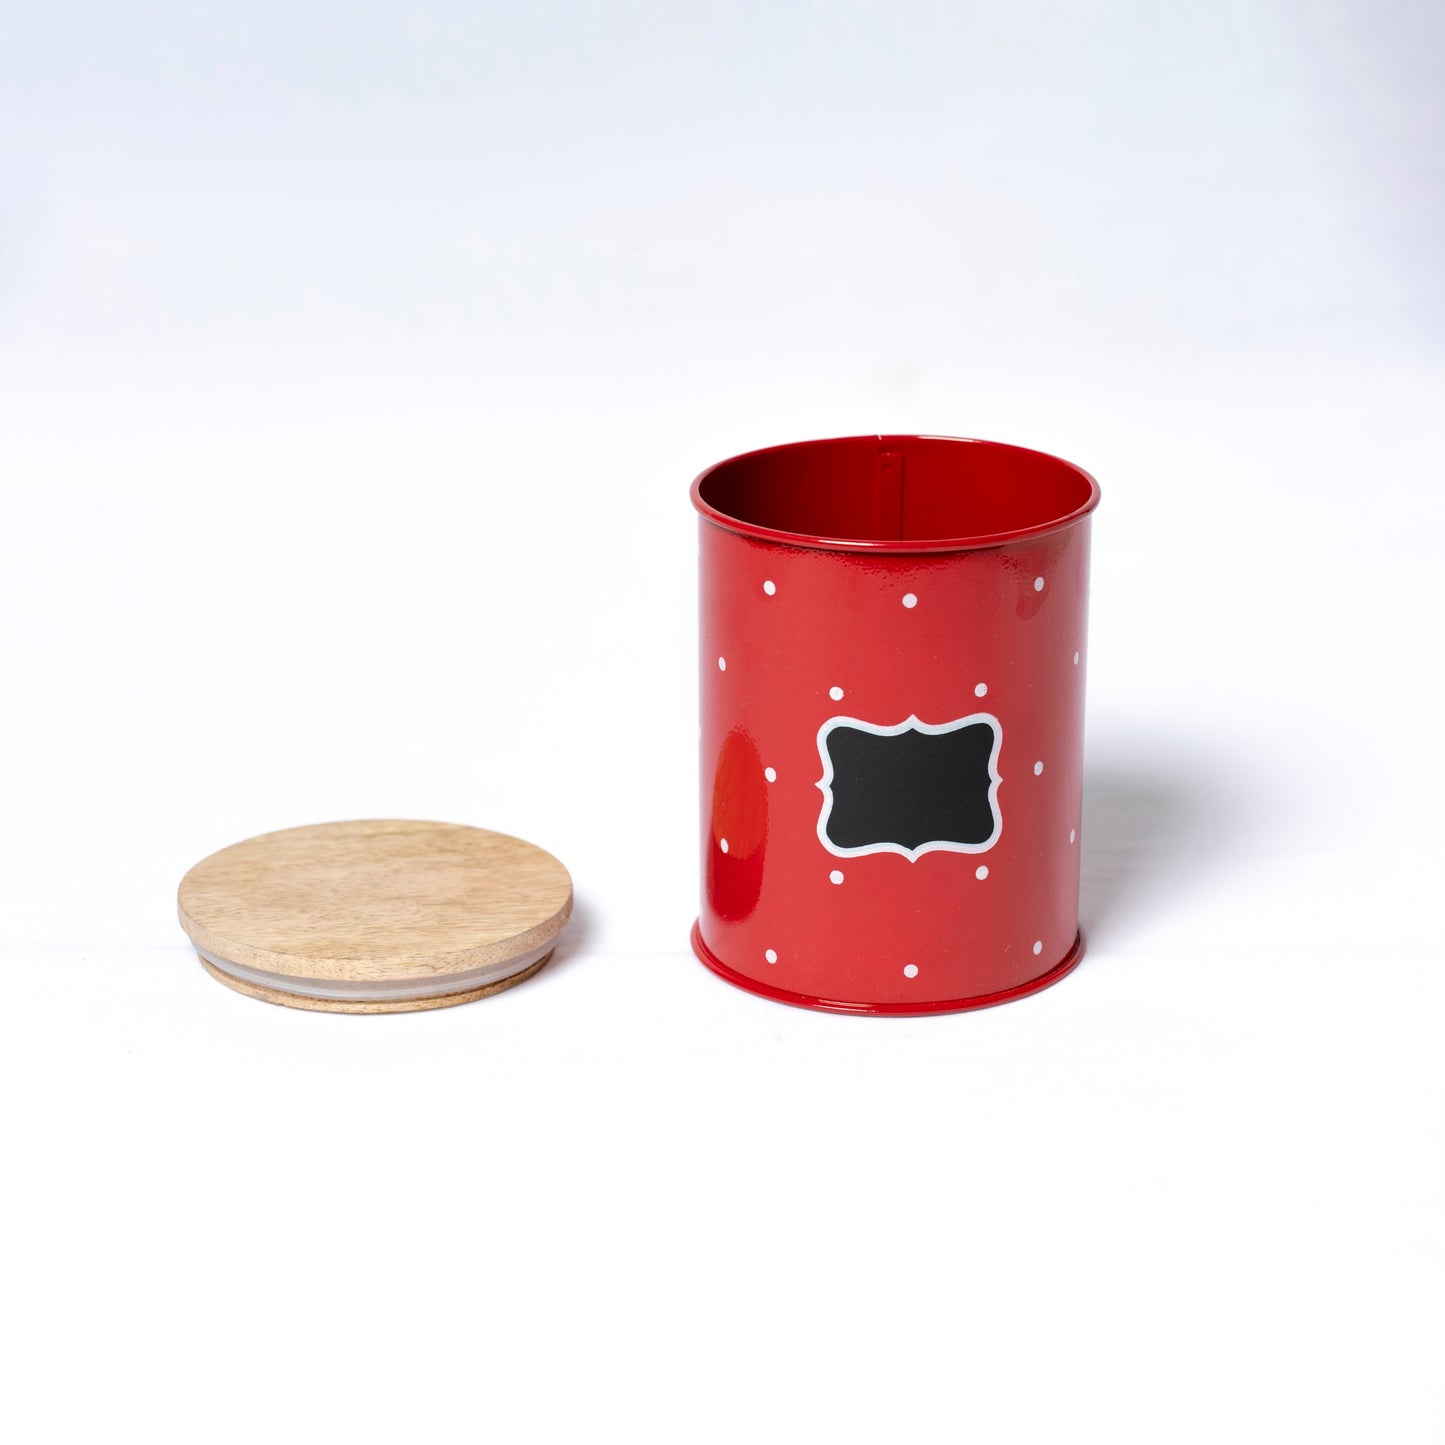 Polka Dot Design Steel Storage Container with Wooden Lid (Red) - SCST0005 - View 3